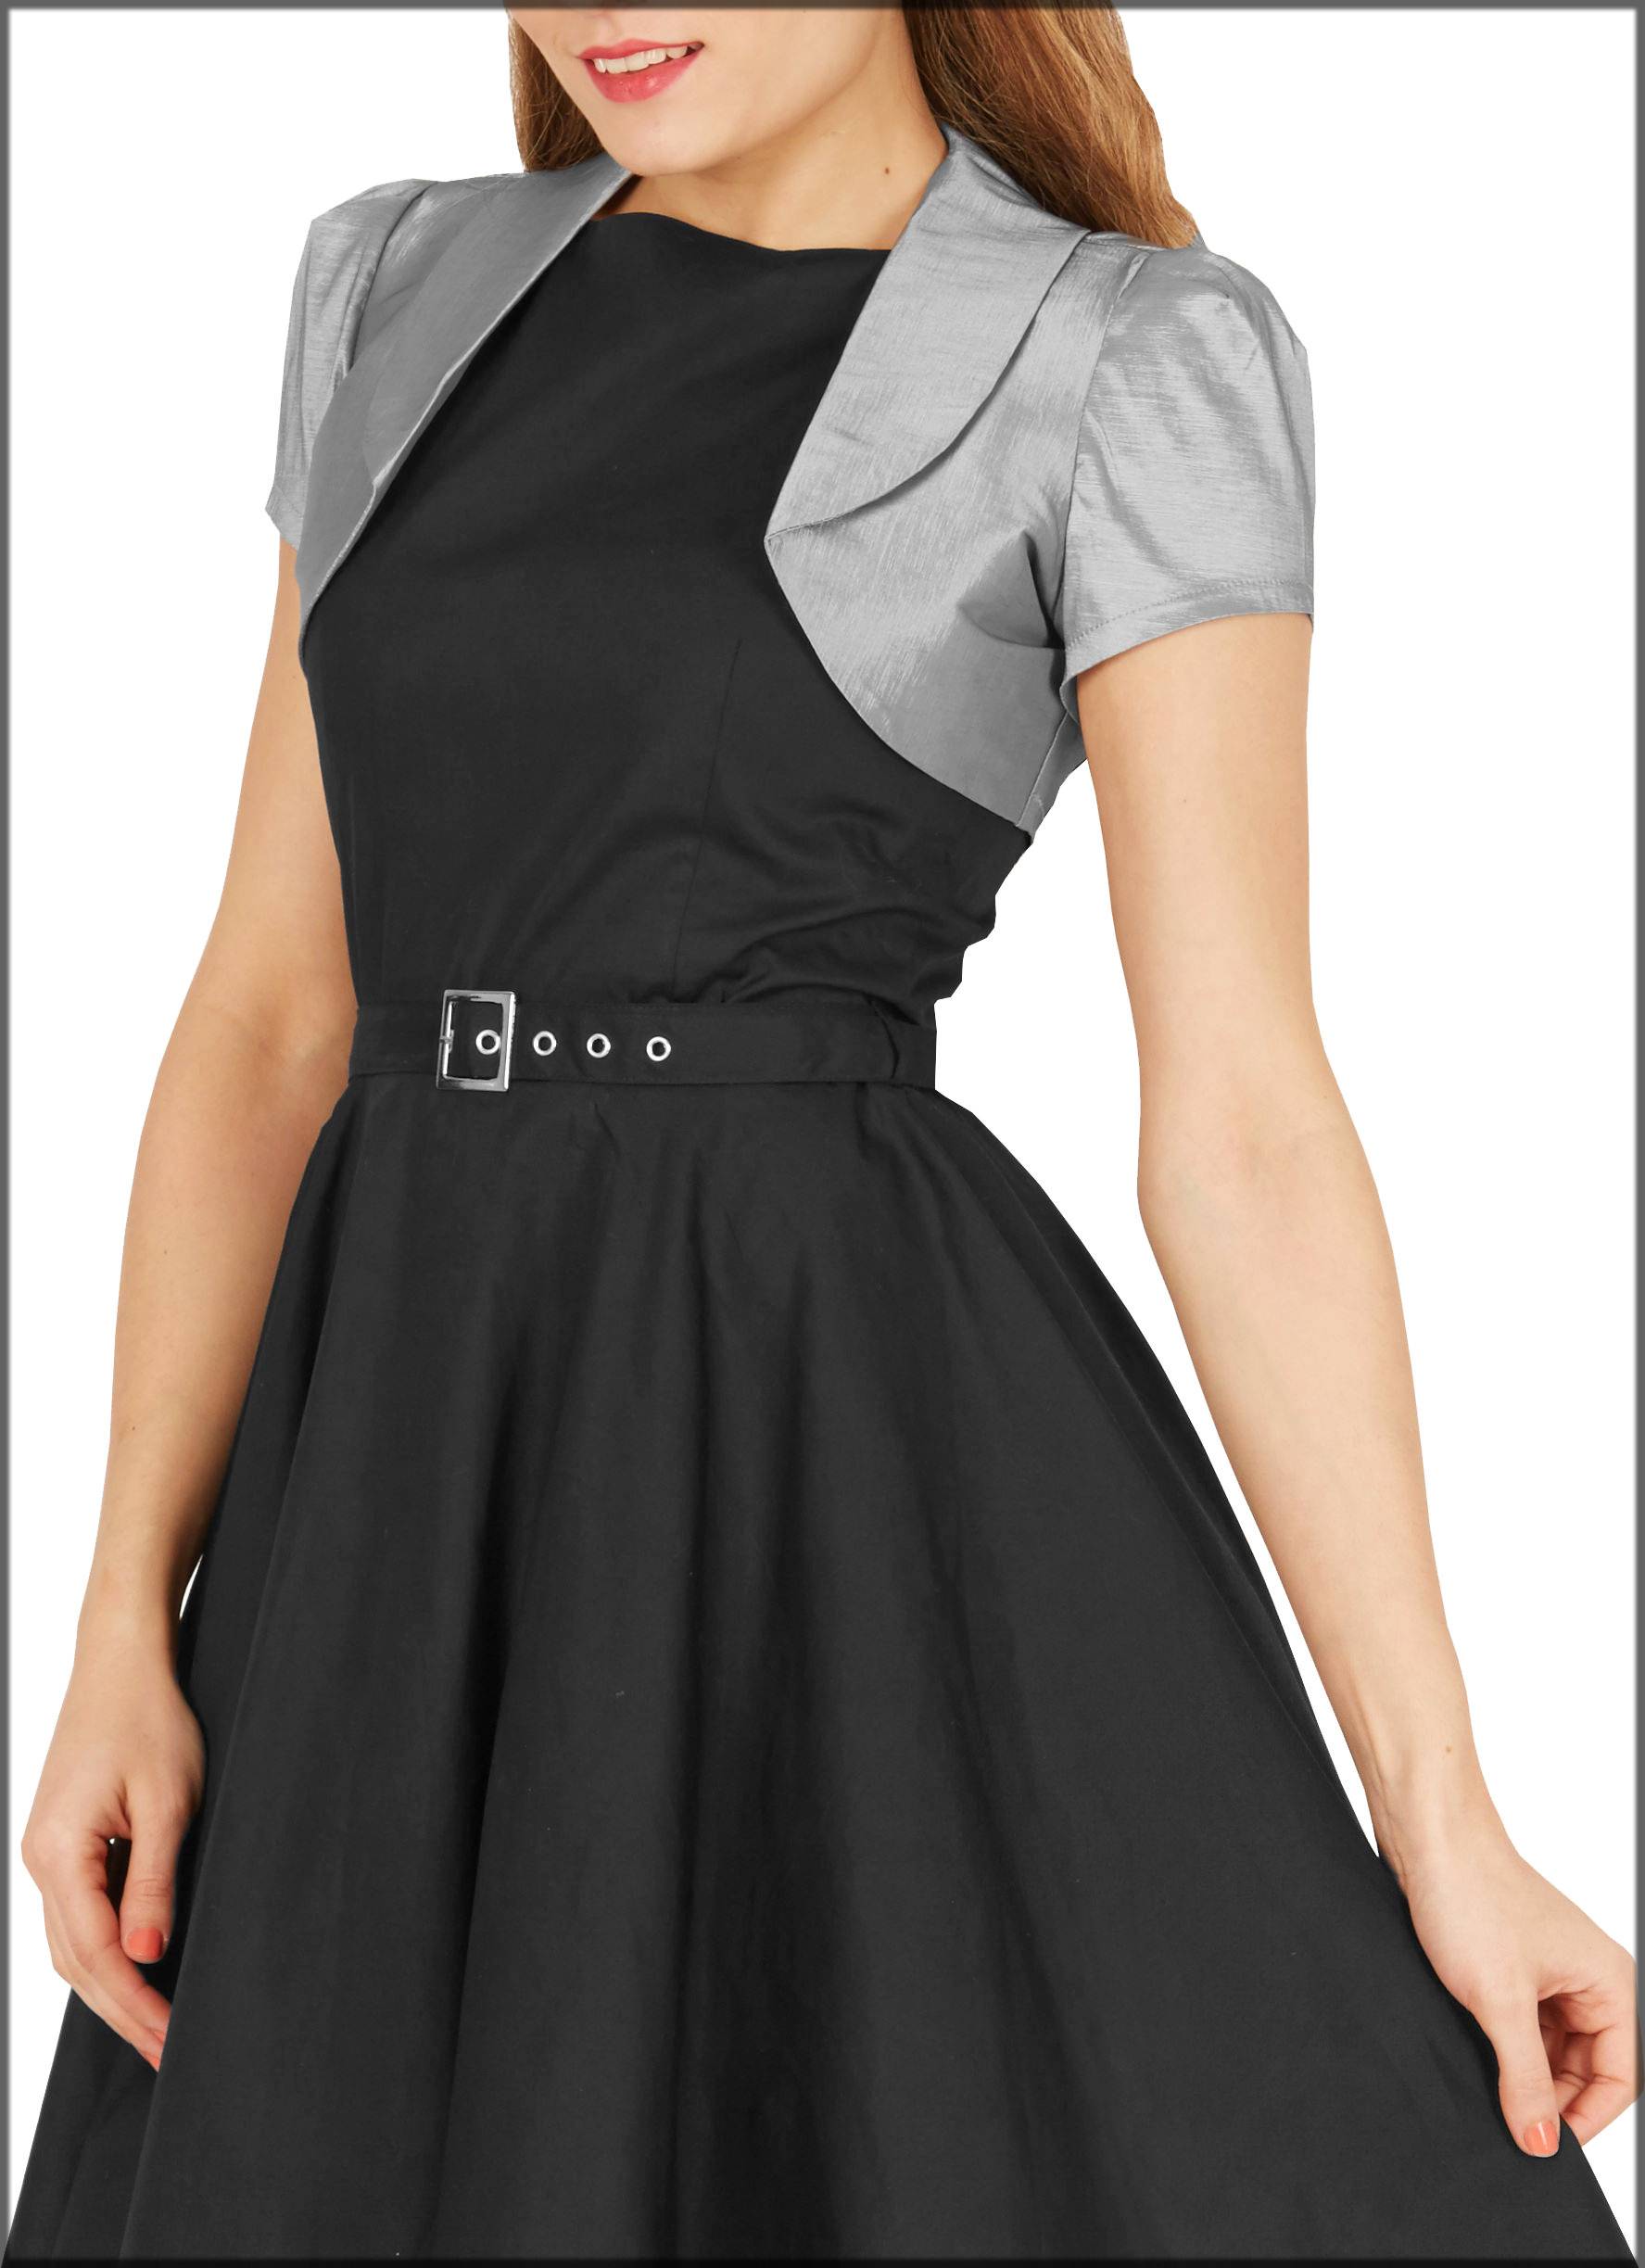 Black with Half White Overcoat Styled Knee Length Frock for Girls with   SeasonsChennai